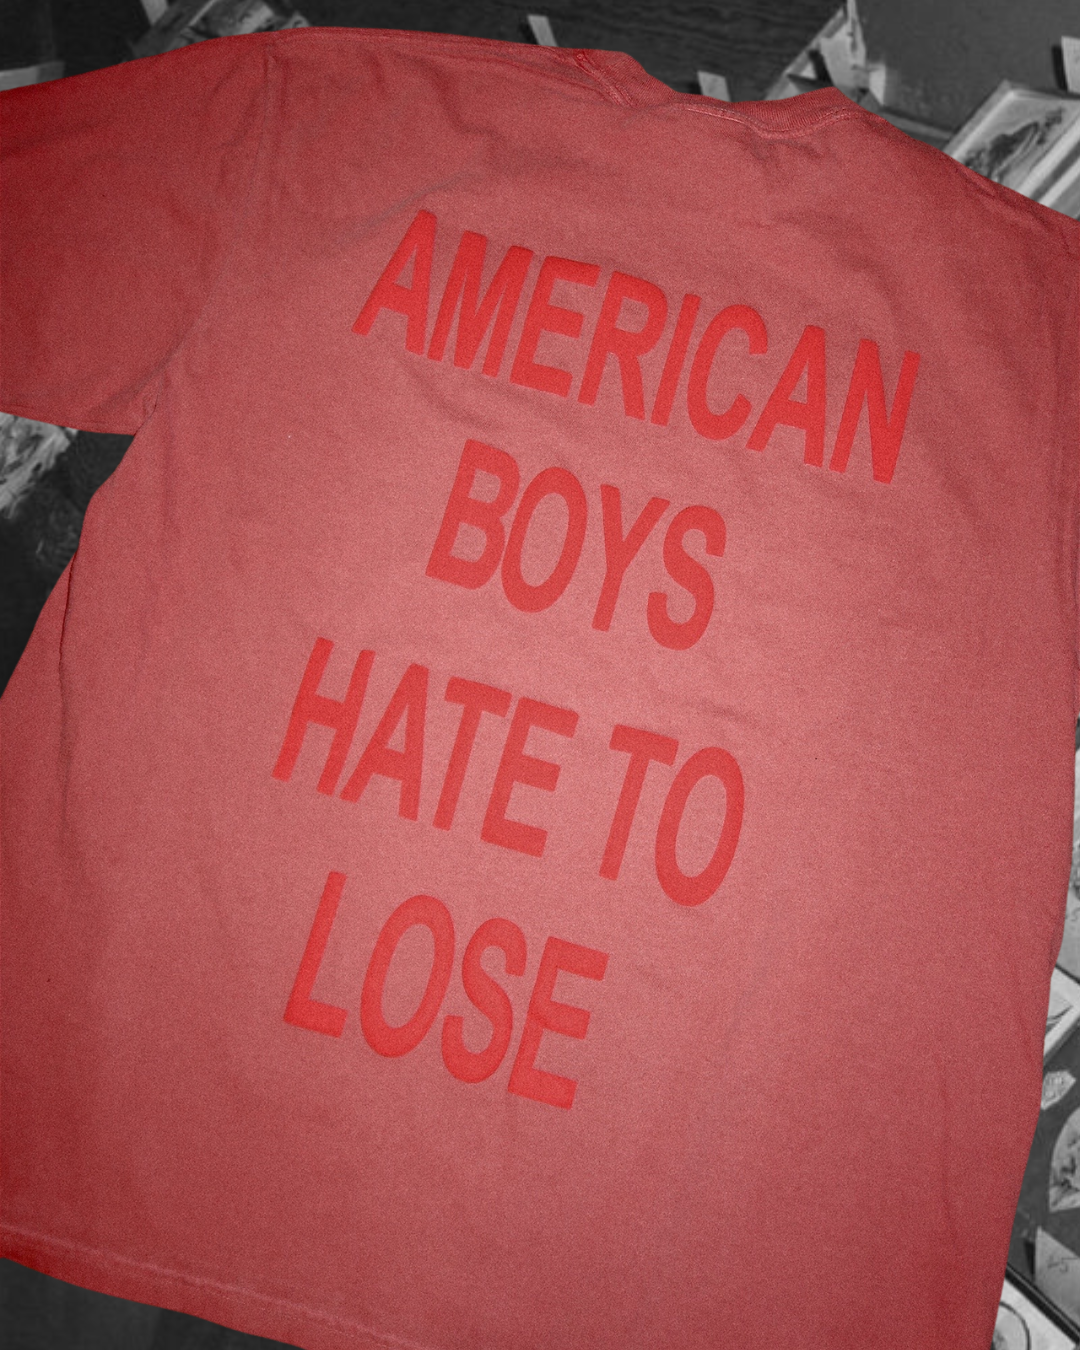 AMERICAN BOYS HATE TO LOSE Garment Dyed Tee